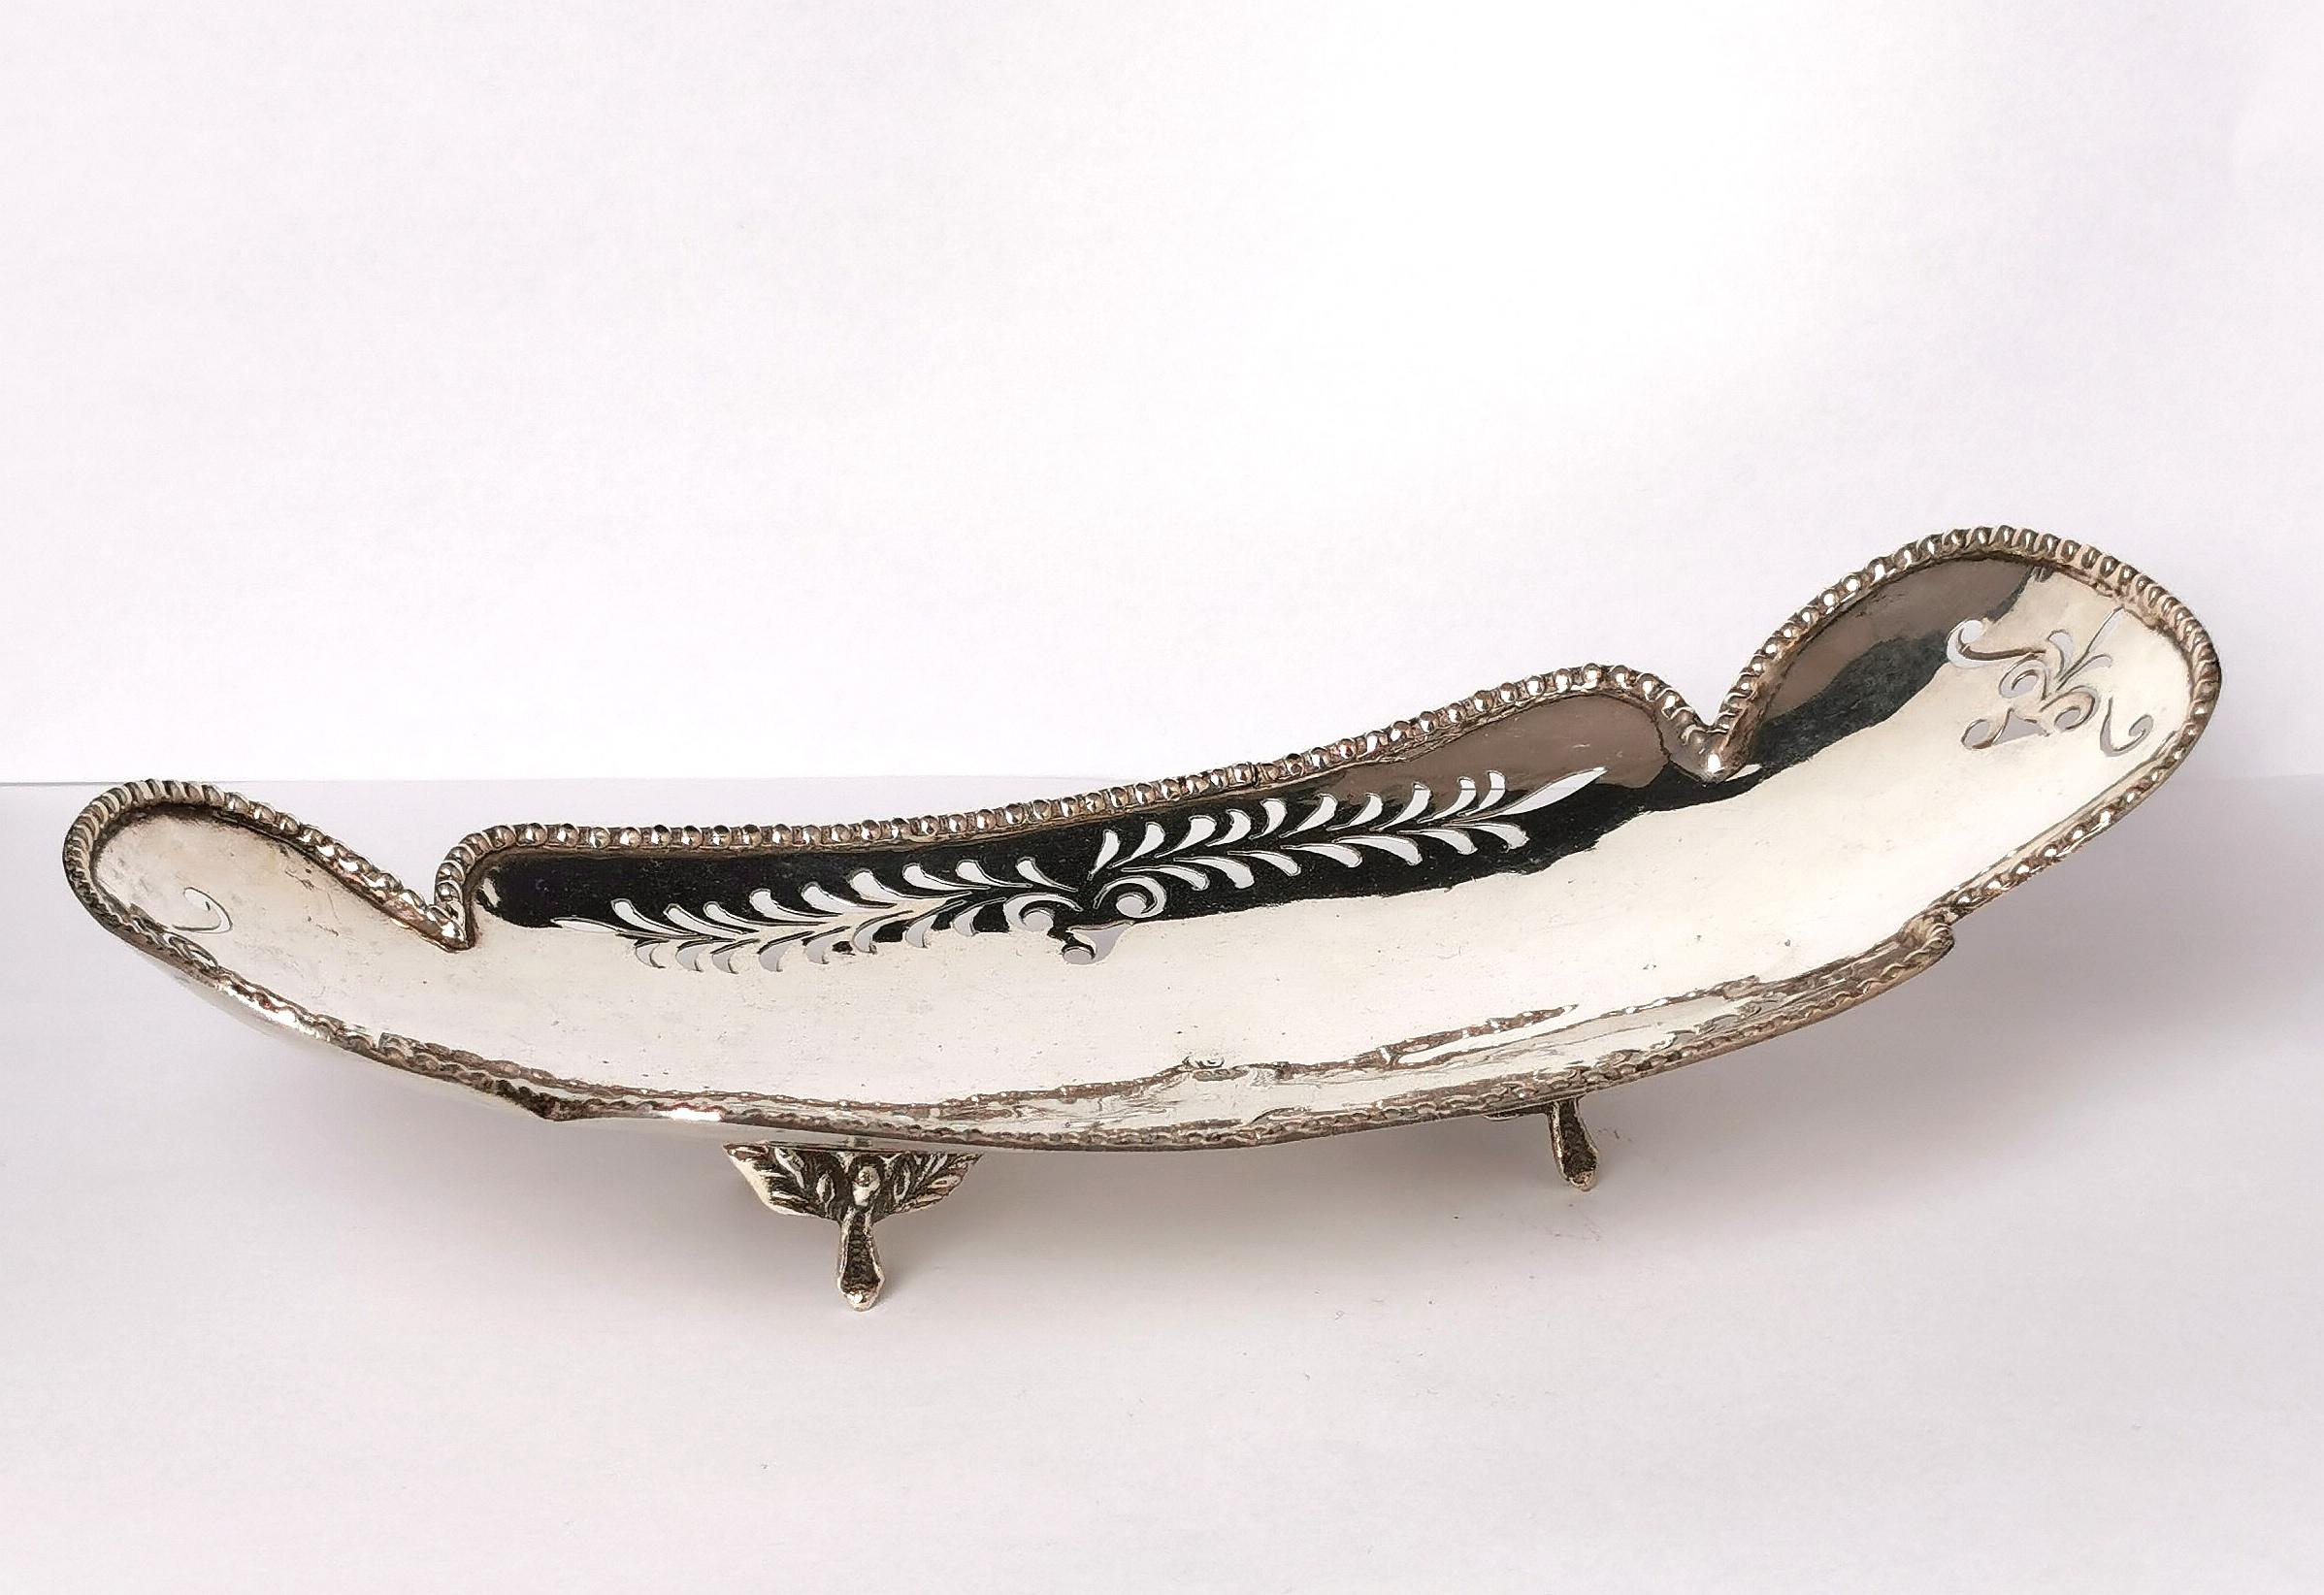 An attractive antique early 20th century bread or sweetmeat dish.

It is made from 800 silver and has an elongated shape standing raised on 4 feet with repousse detailing.

The dish has a beaded rim and Pierced decoration making it a very